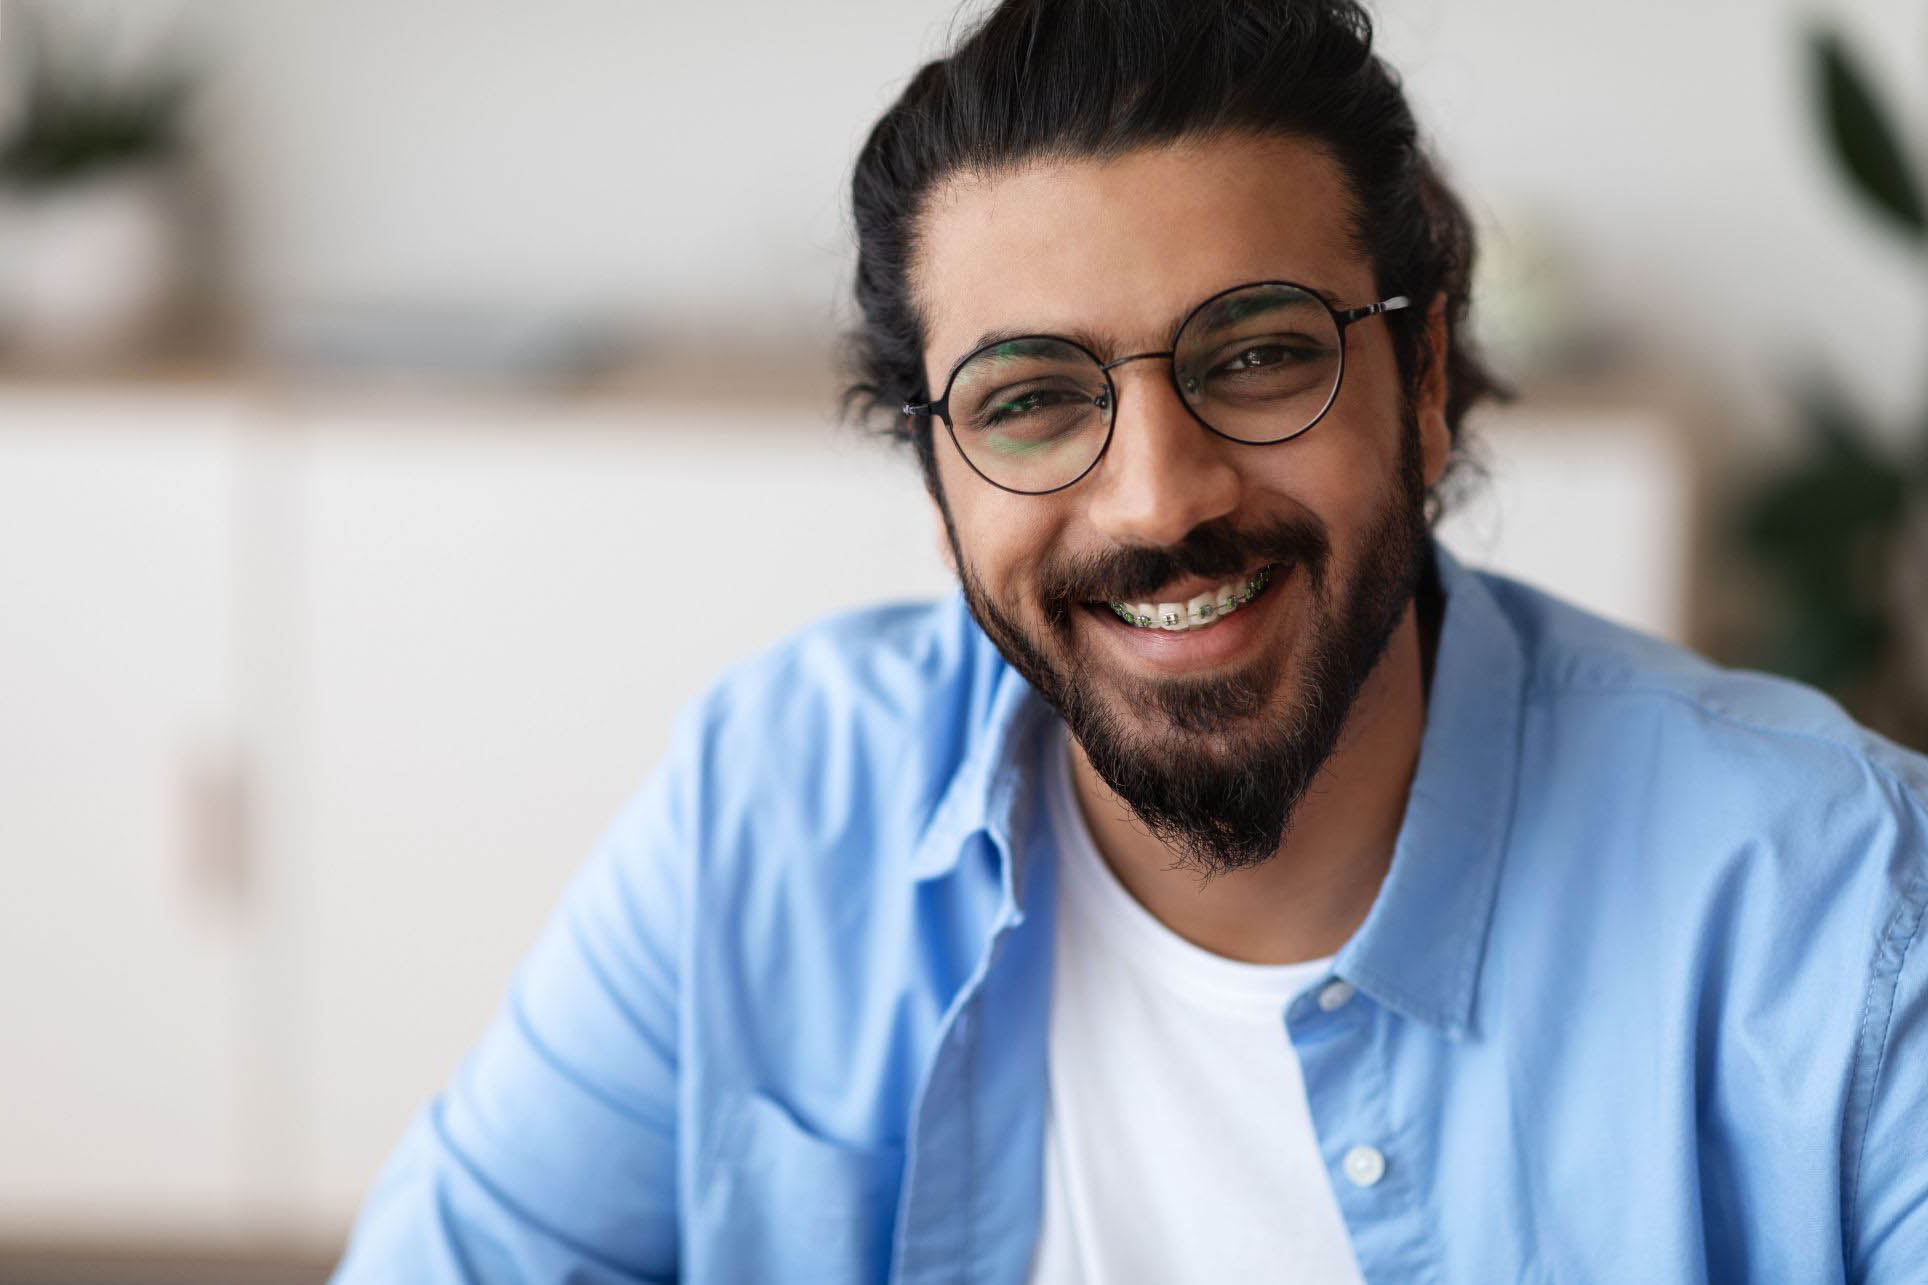 Closeup Portrait Of Positive Indian Guy With Dental Braces And Eyeglasses Smiling At Camera, Handsome Bearded Millennial Man With Brackets On Teeth Posing Indoors, Selective Focus With Copy Space